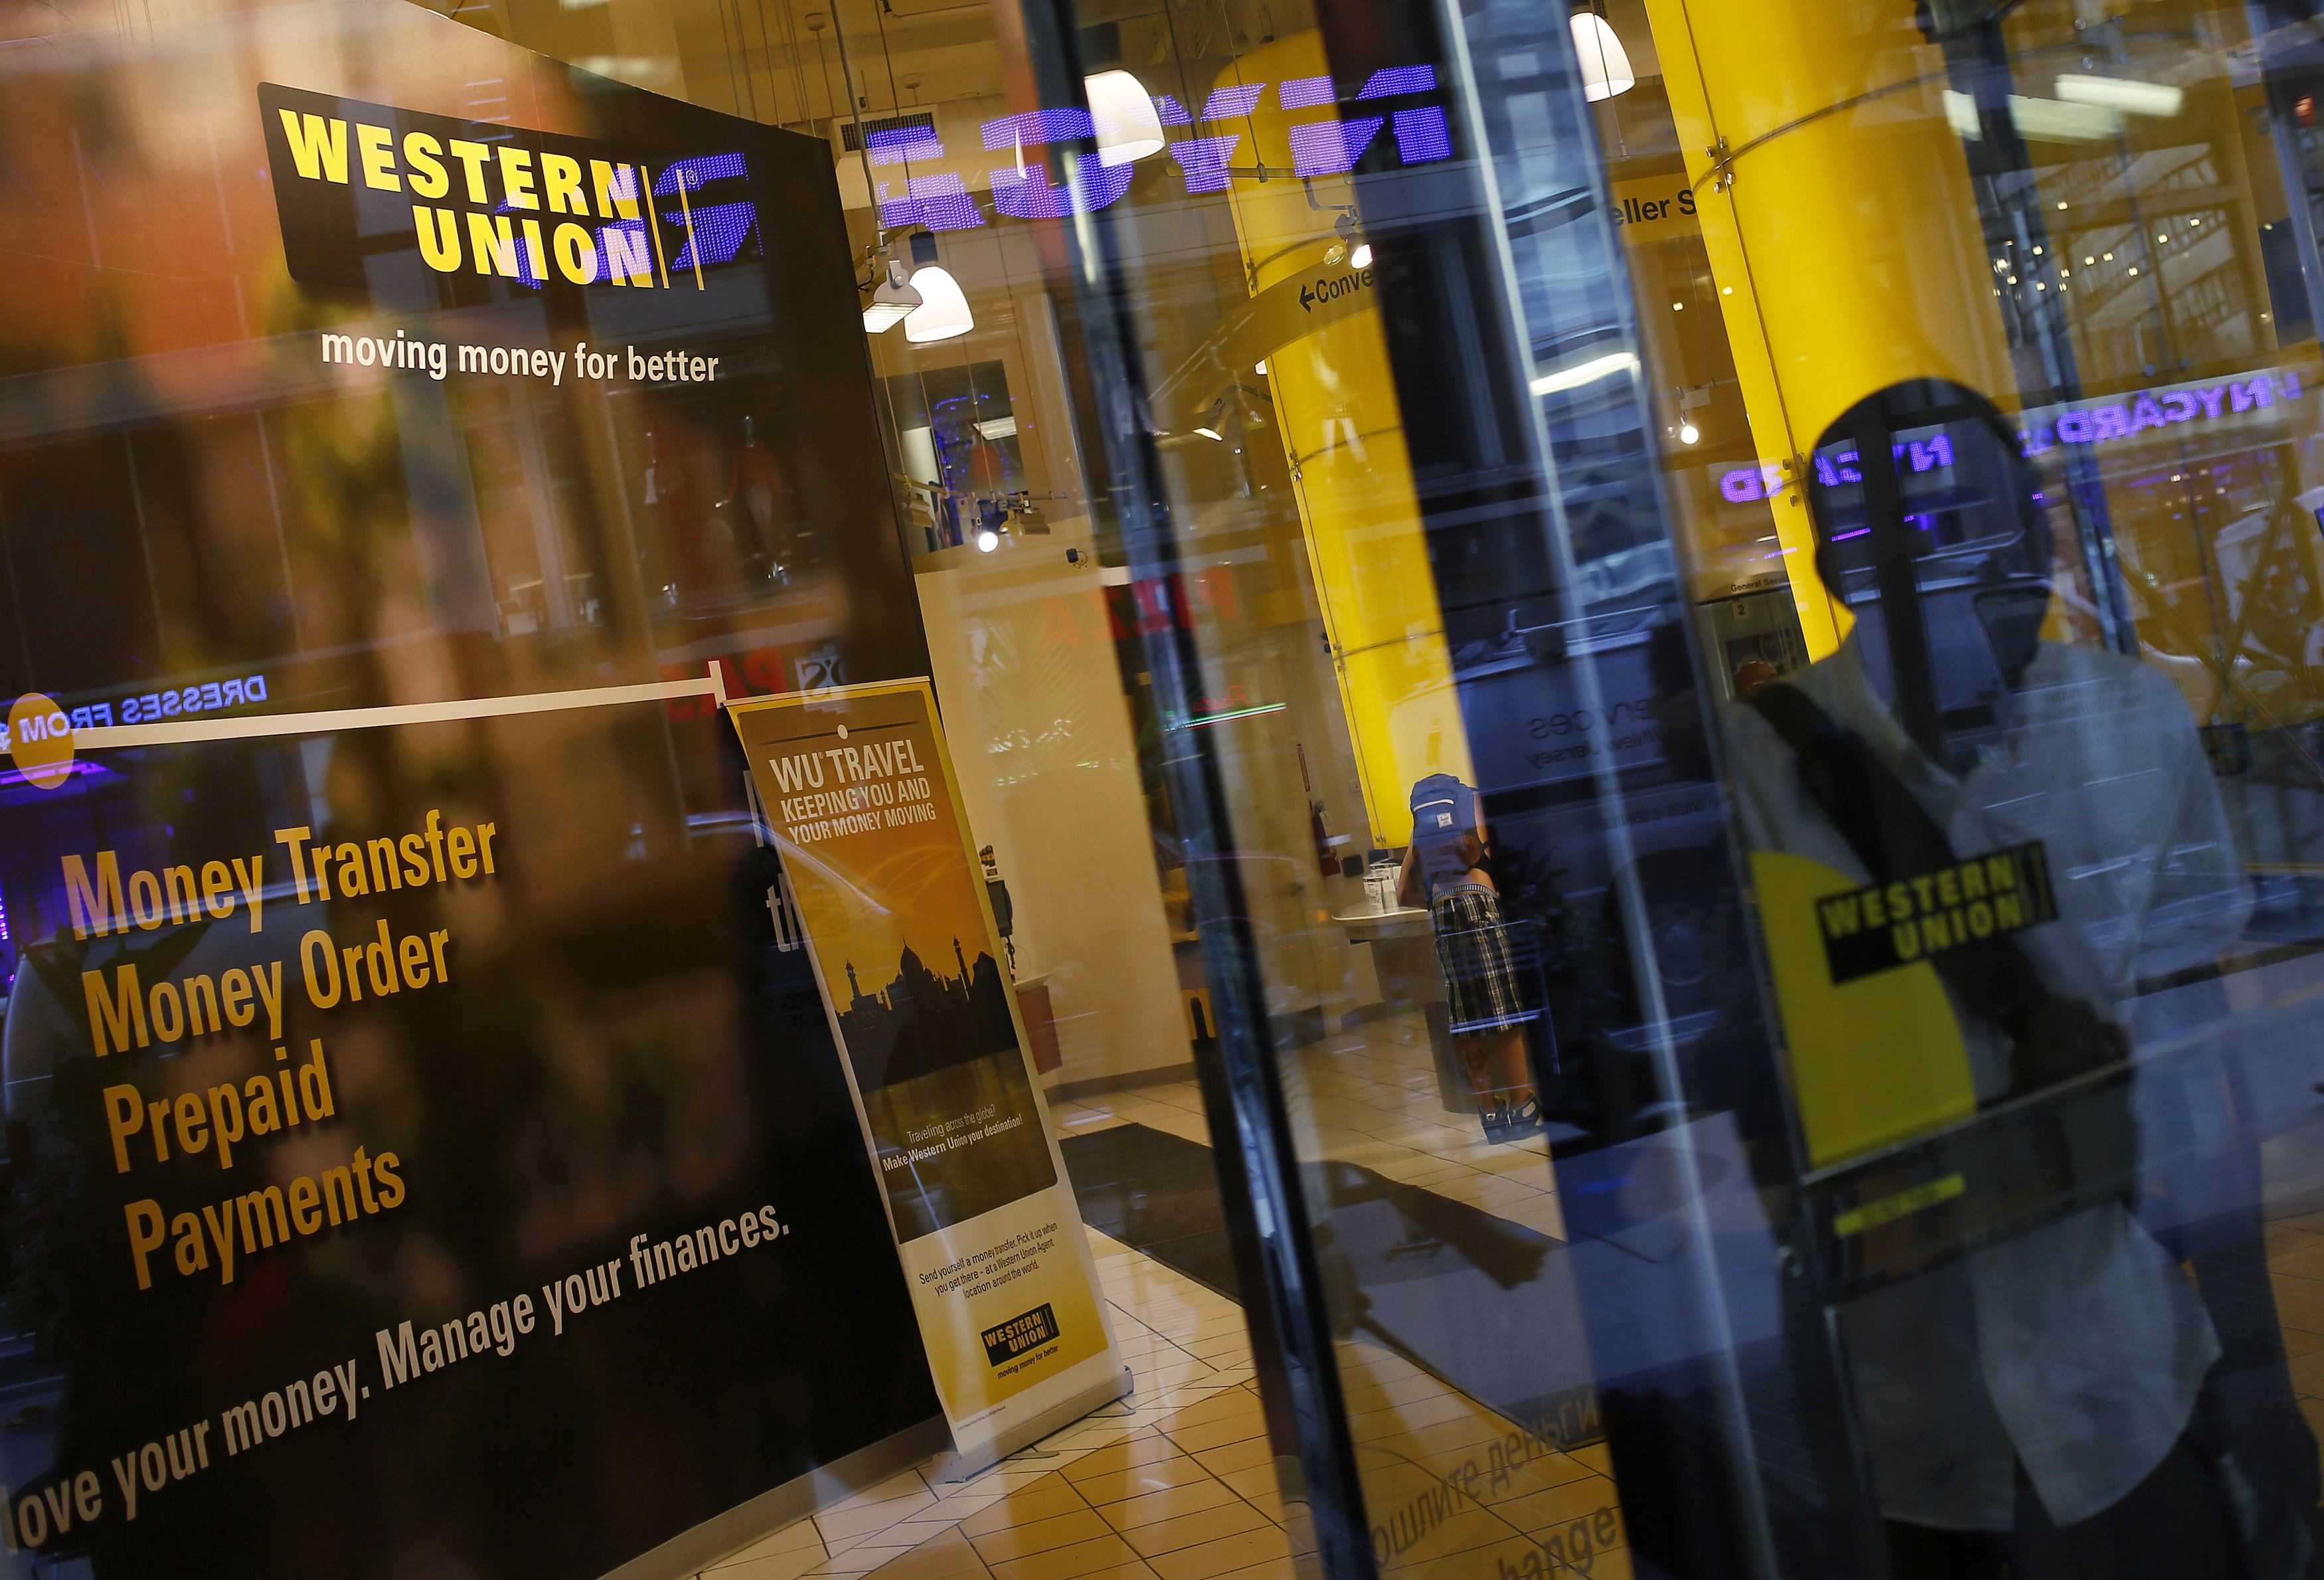 A person walks out of a Western Union branch in New York July 30, 2013. Western Union Co, the world's largest money-transfer company, reported a 27 percent decline in quarterly profit July 30, 2013 after cutting prices and spending more on its online business to compete with more nimble rivals. REUTERS/Shannon Stapleton (UNITED STATES - Tags: BUSINESS)